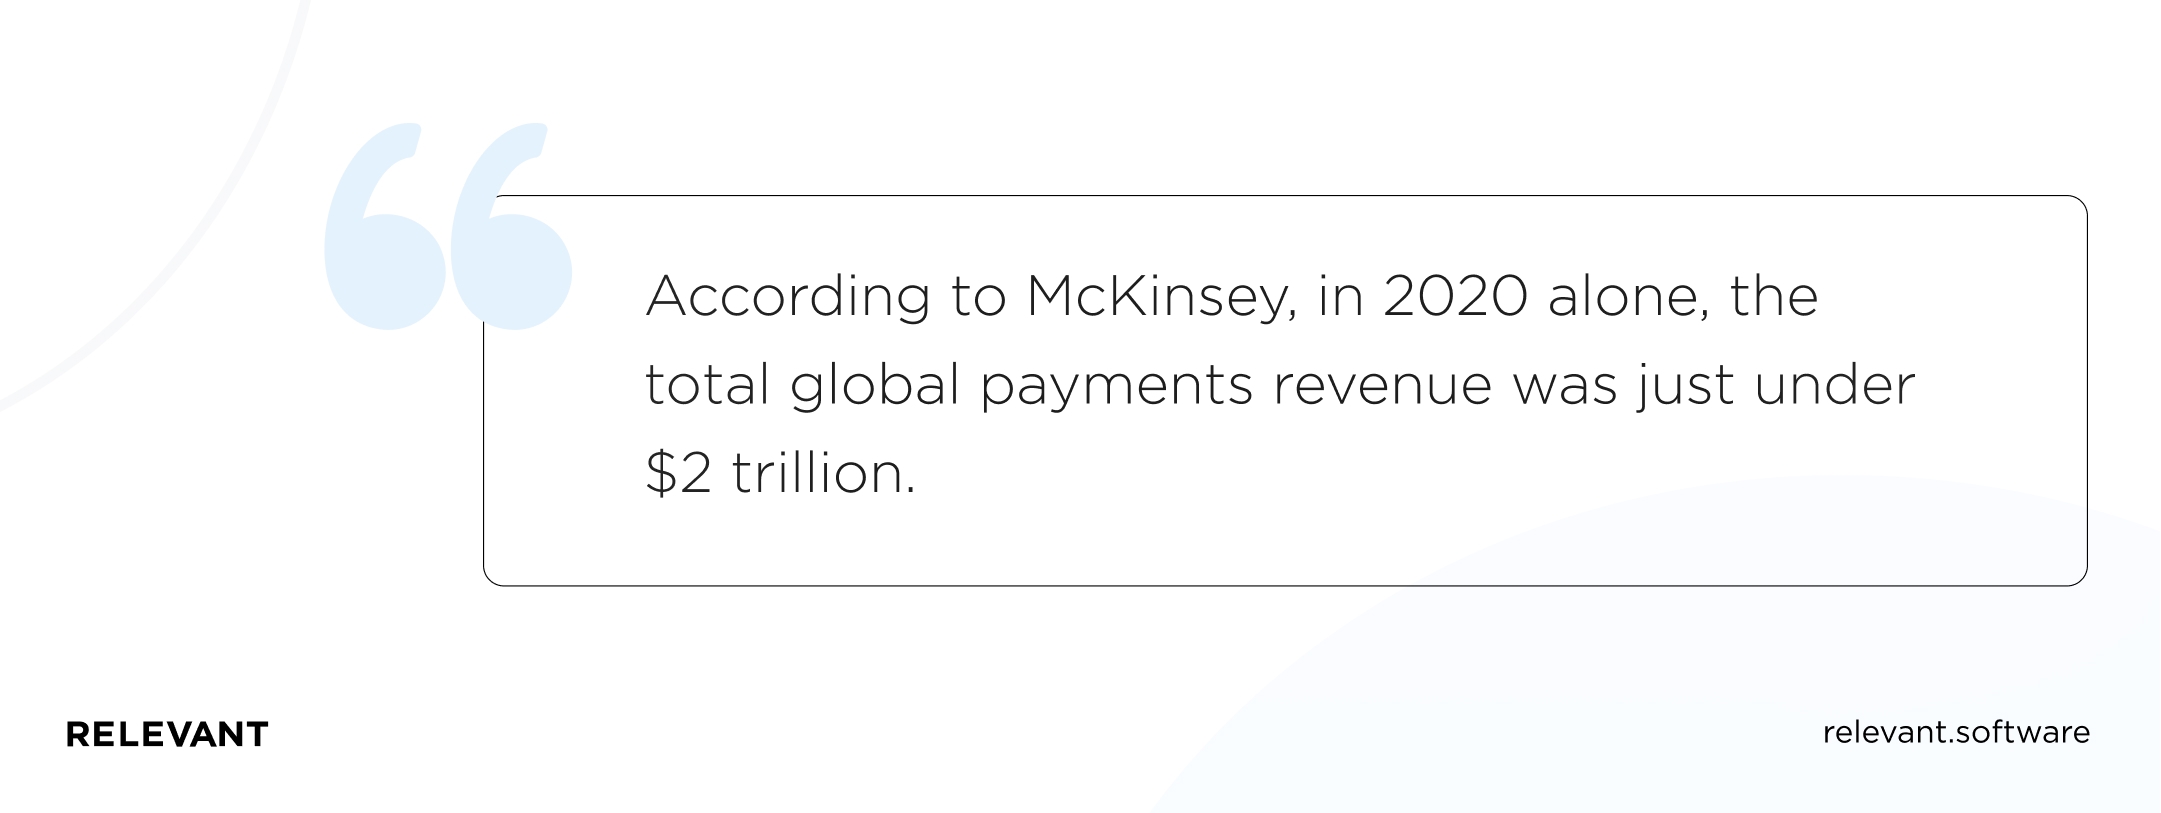 According to McKinsey, in 2020 alone, the total global payments revenue was just under 